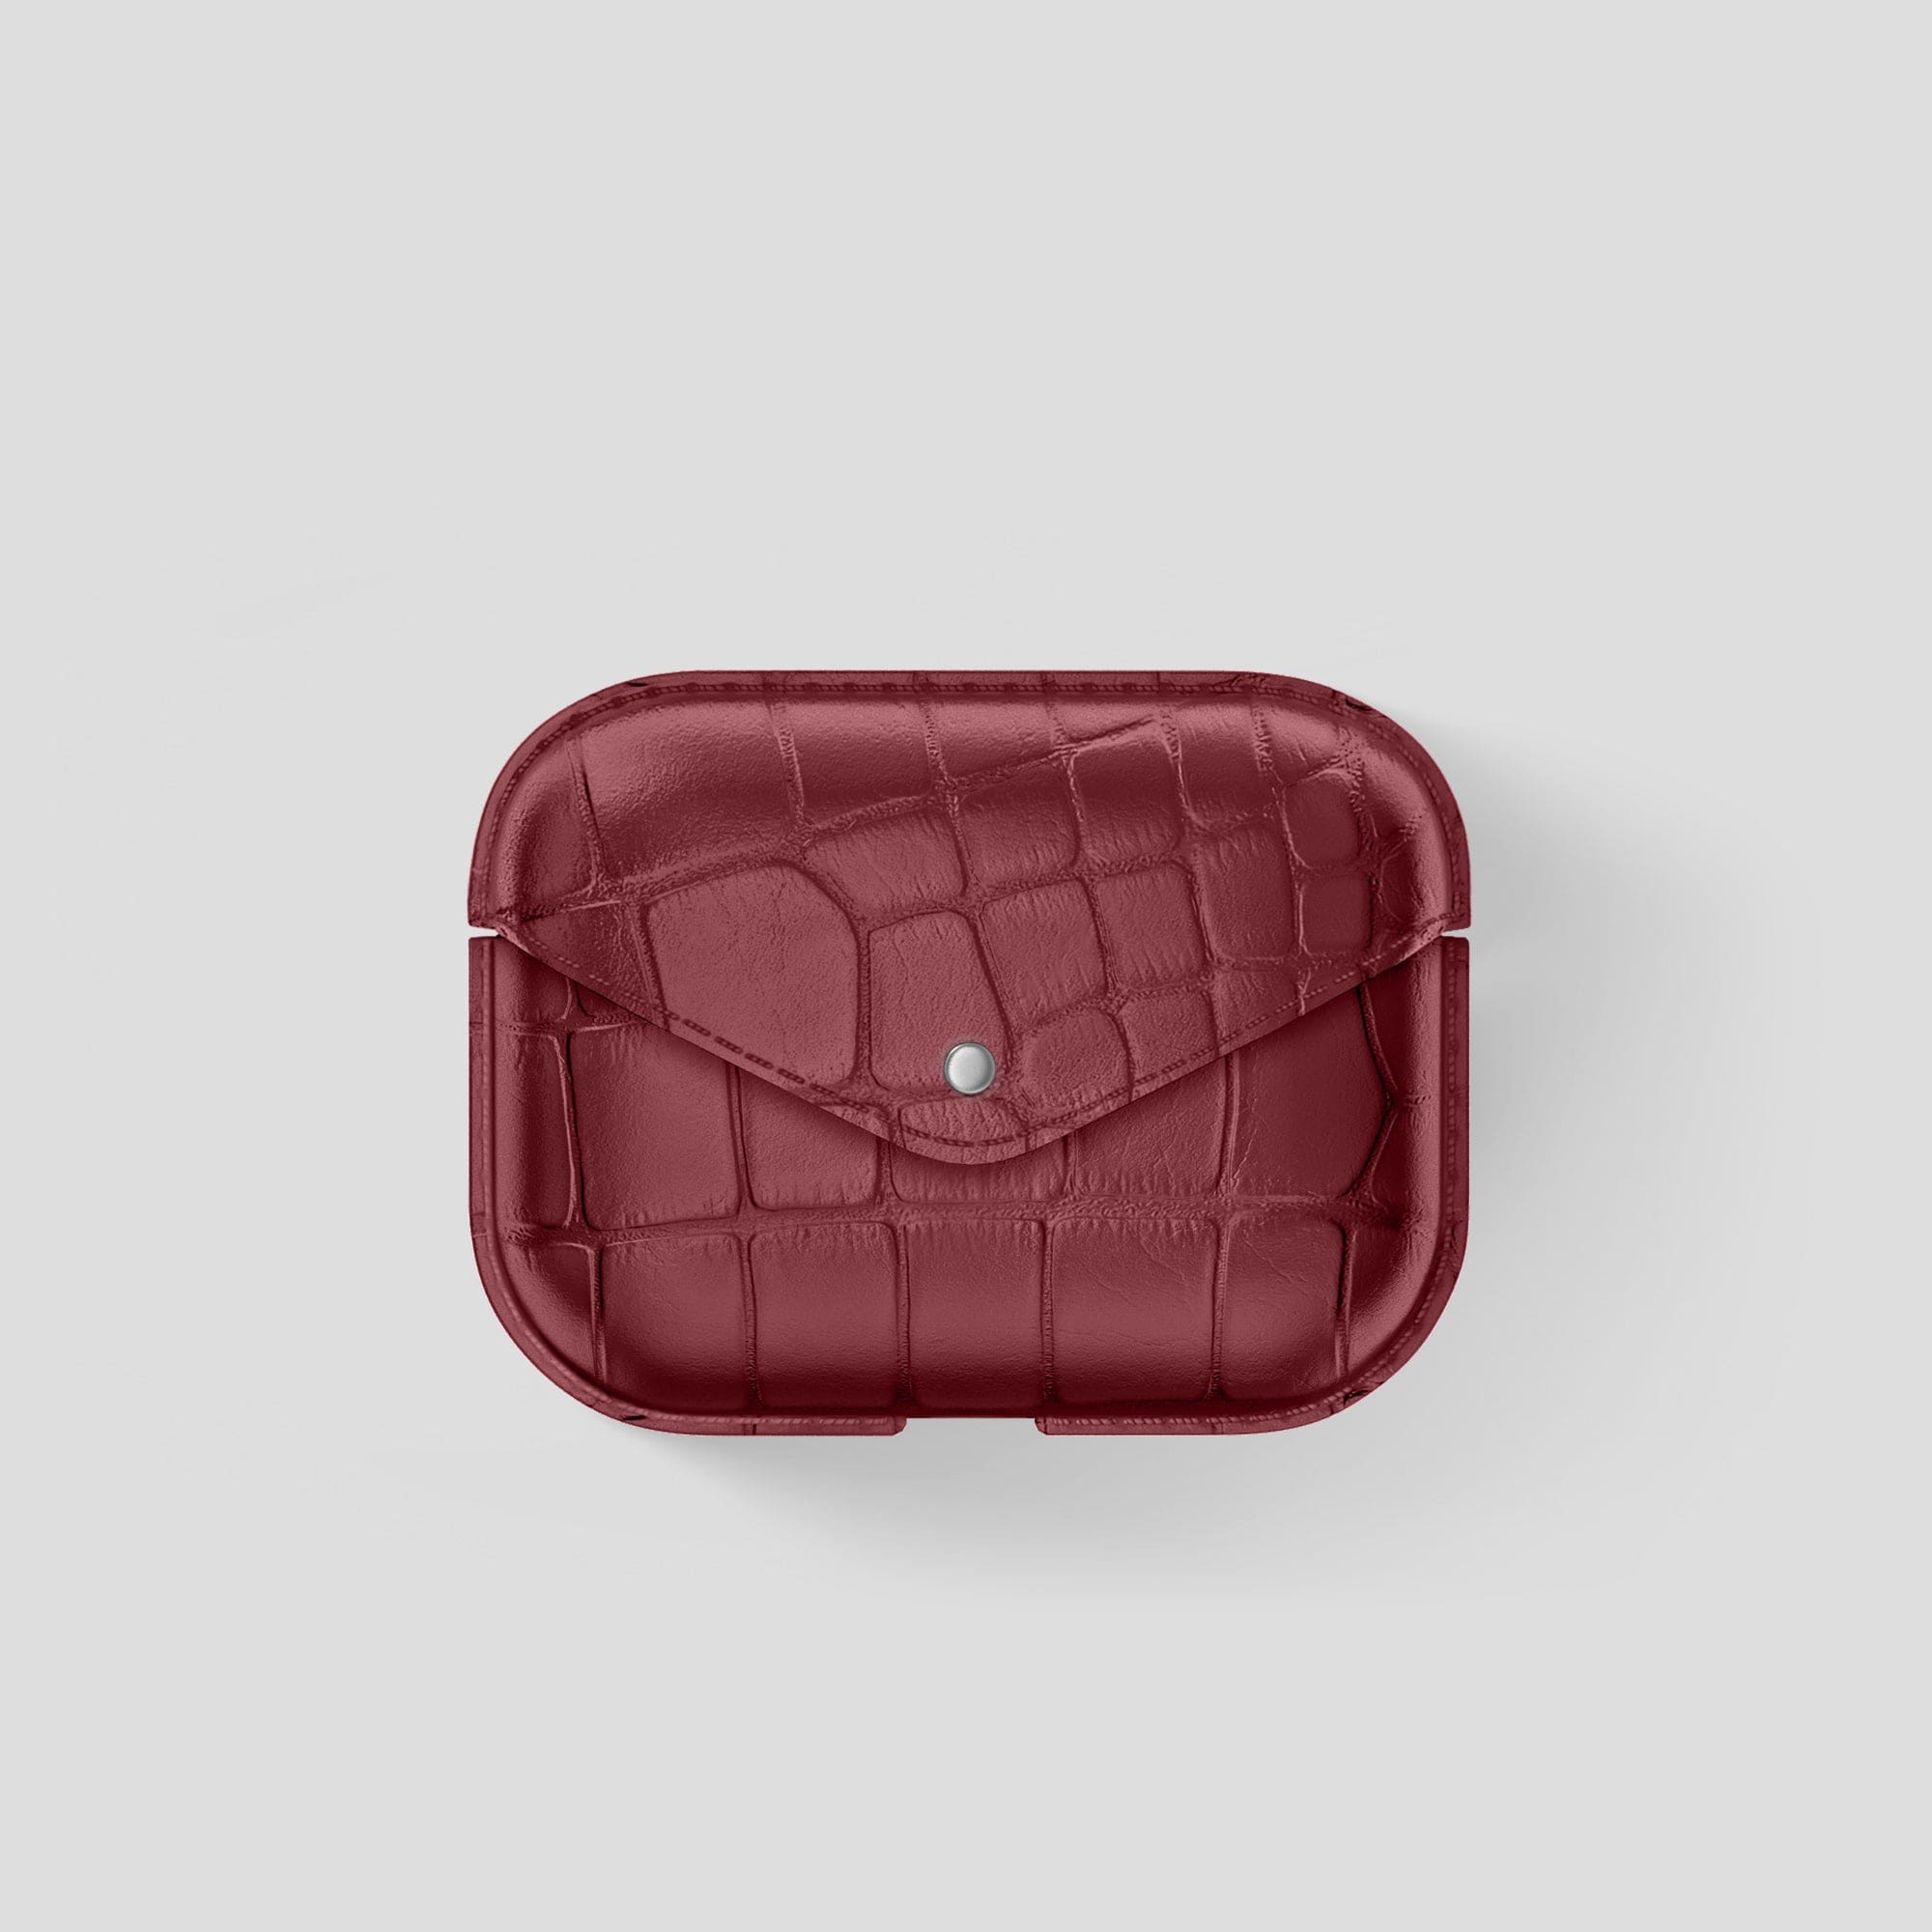 AirPods Case Paris Burgundy  SURITT Leather Cases for AirPods